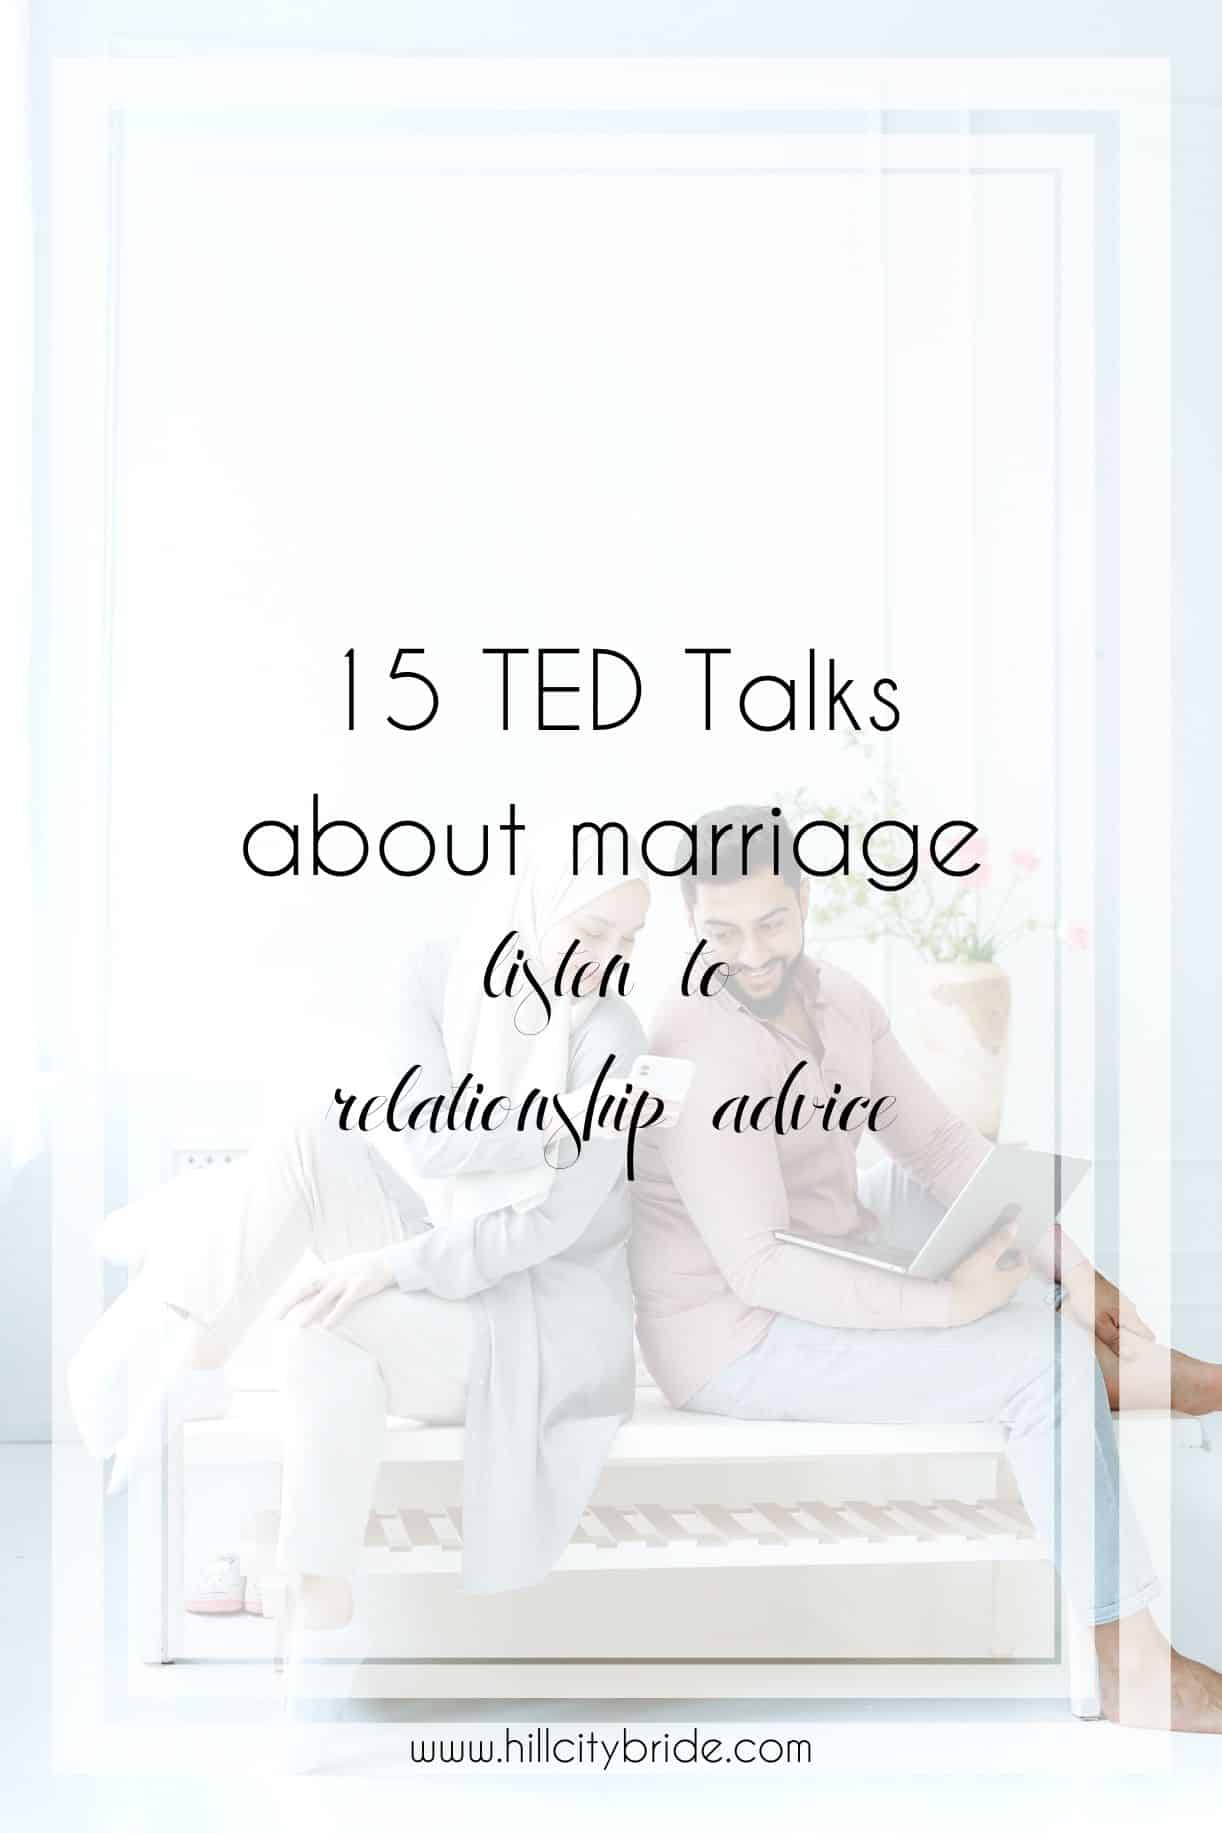 TED Talk Relationship Advice Suggestions